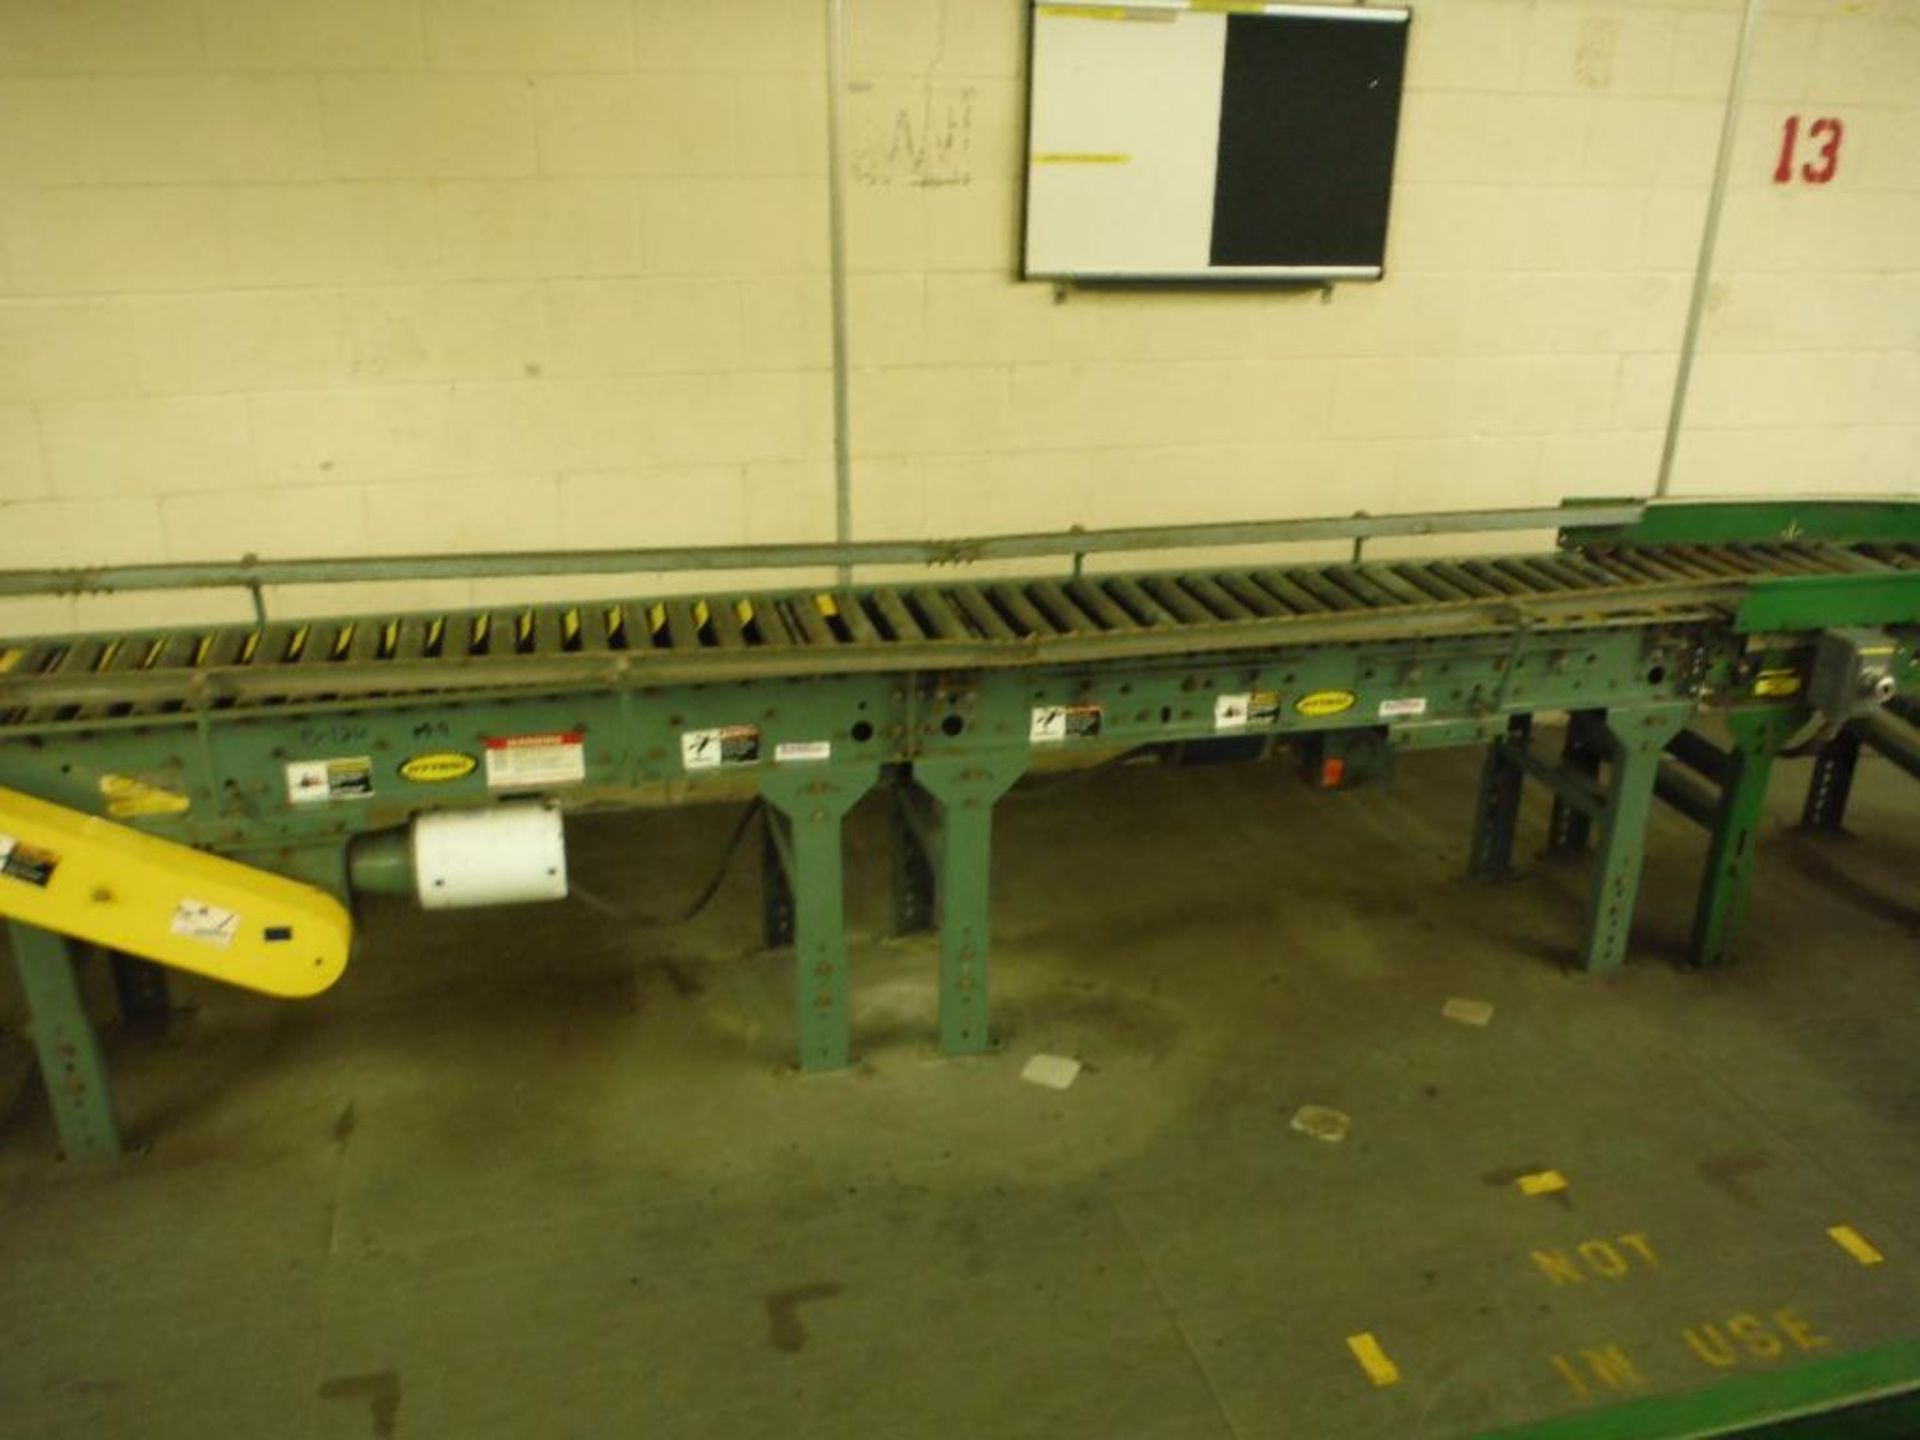 Hytrol powered roller conveyor, 126 ft. long x 15 in. wide, with (2) 90 degree turns, motors and - Image 9 of 13